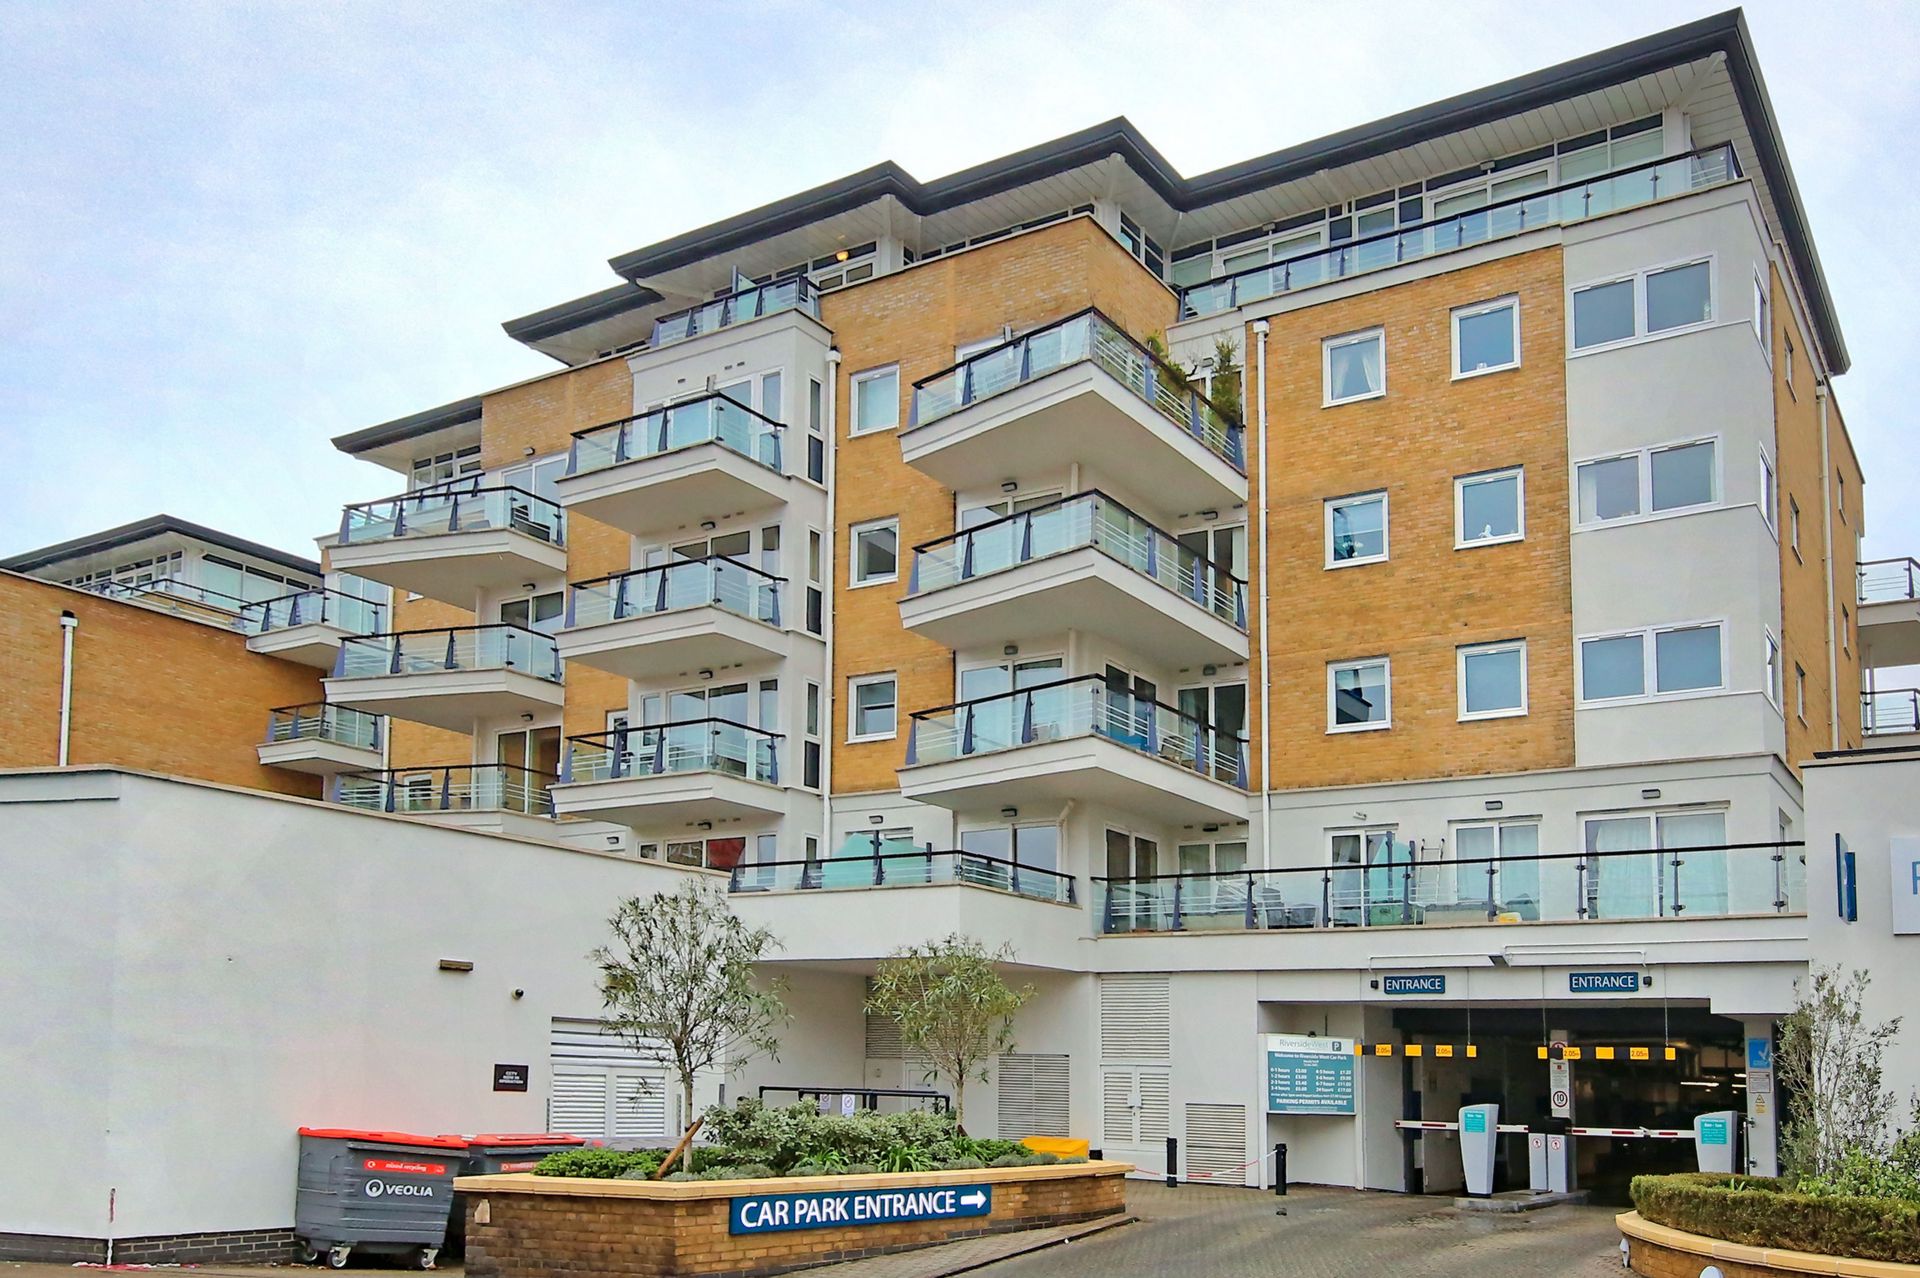 1 bedroom flat, 271 Bluewater House, Smugglers Way Wandsworth